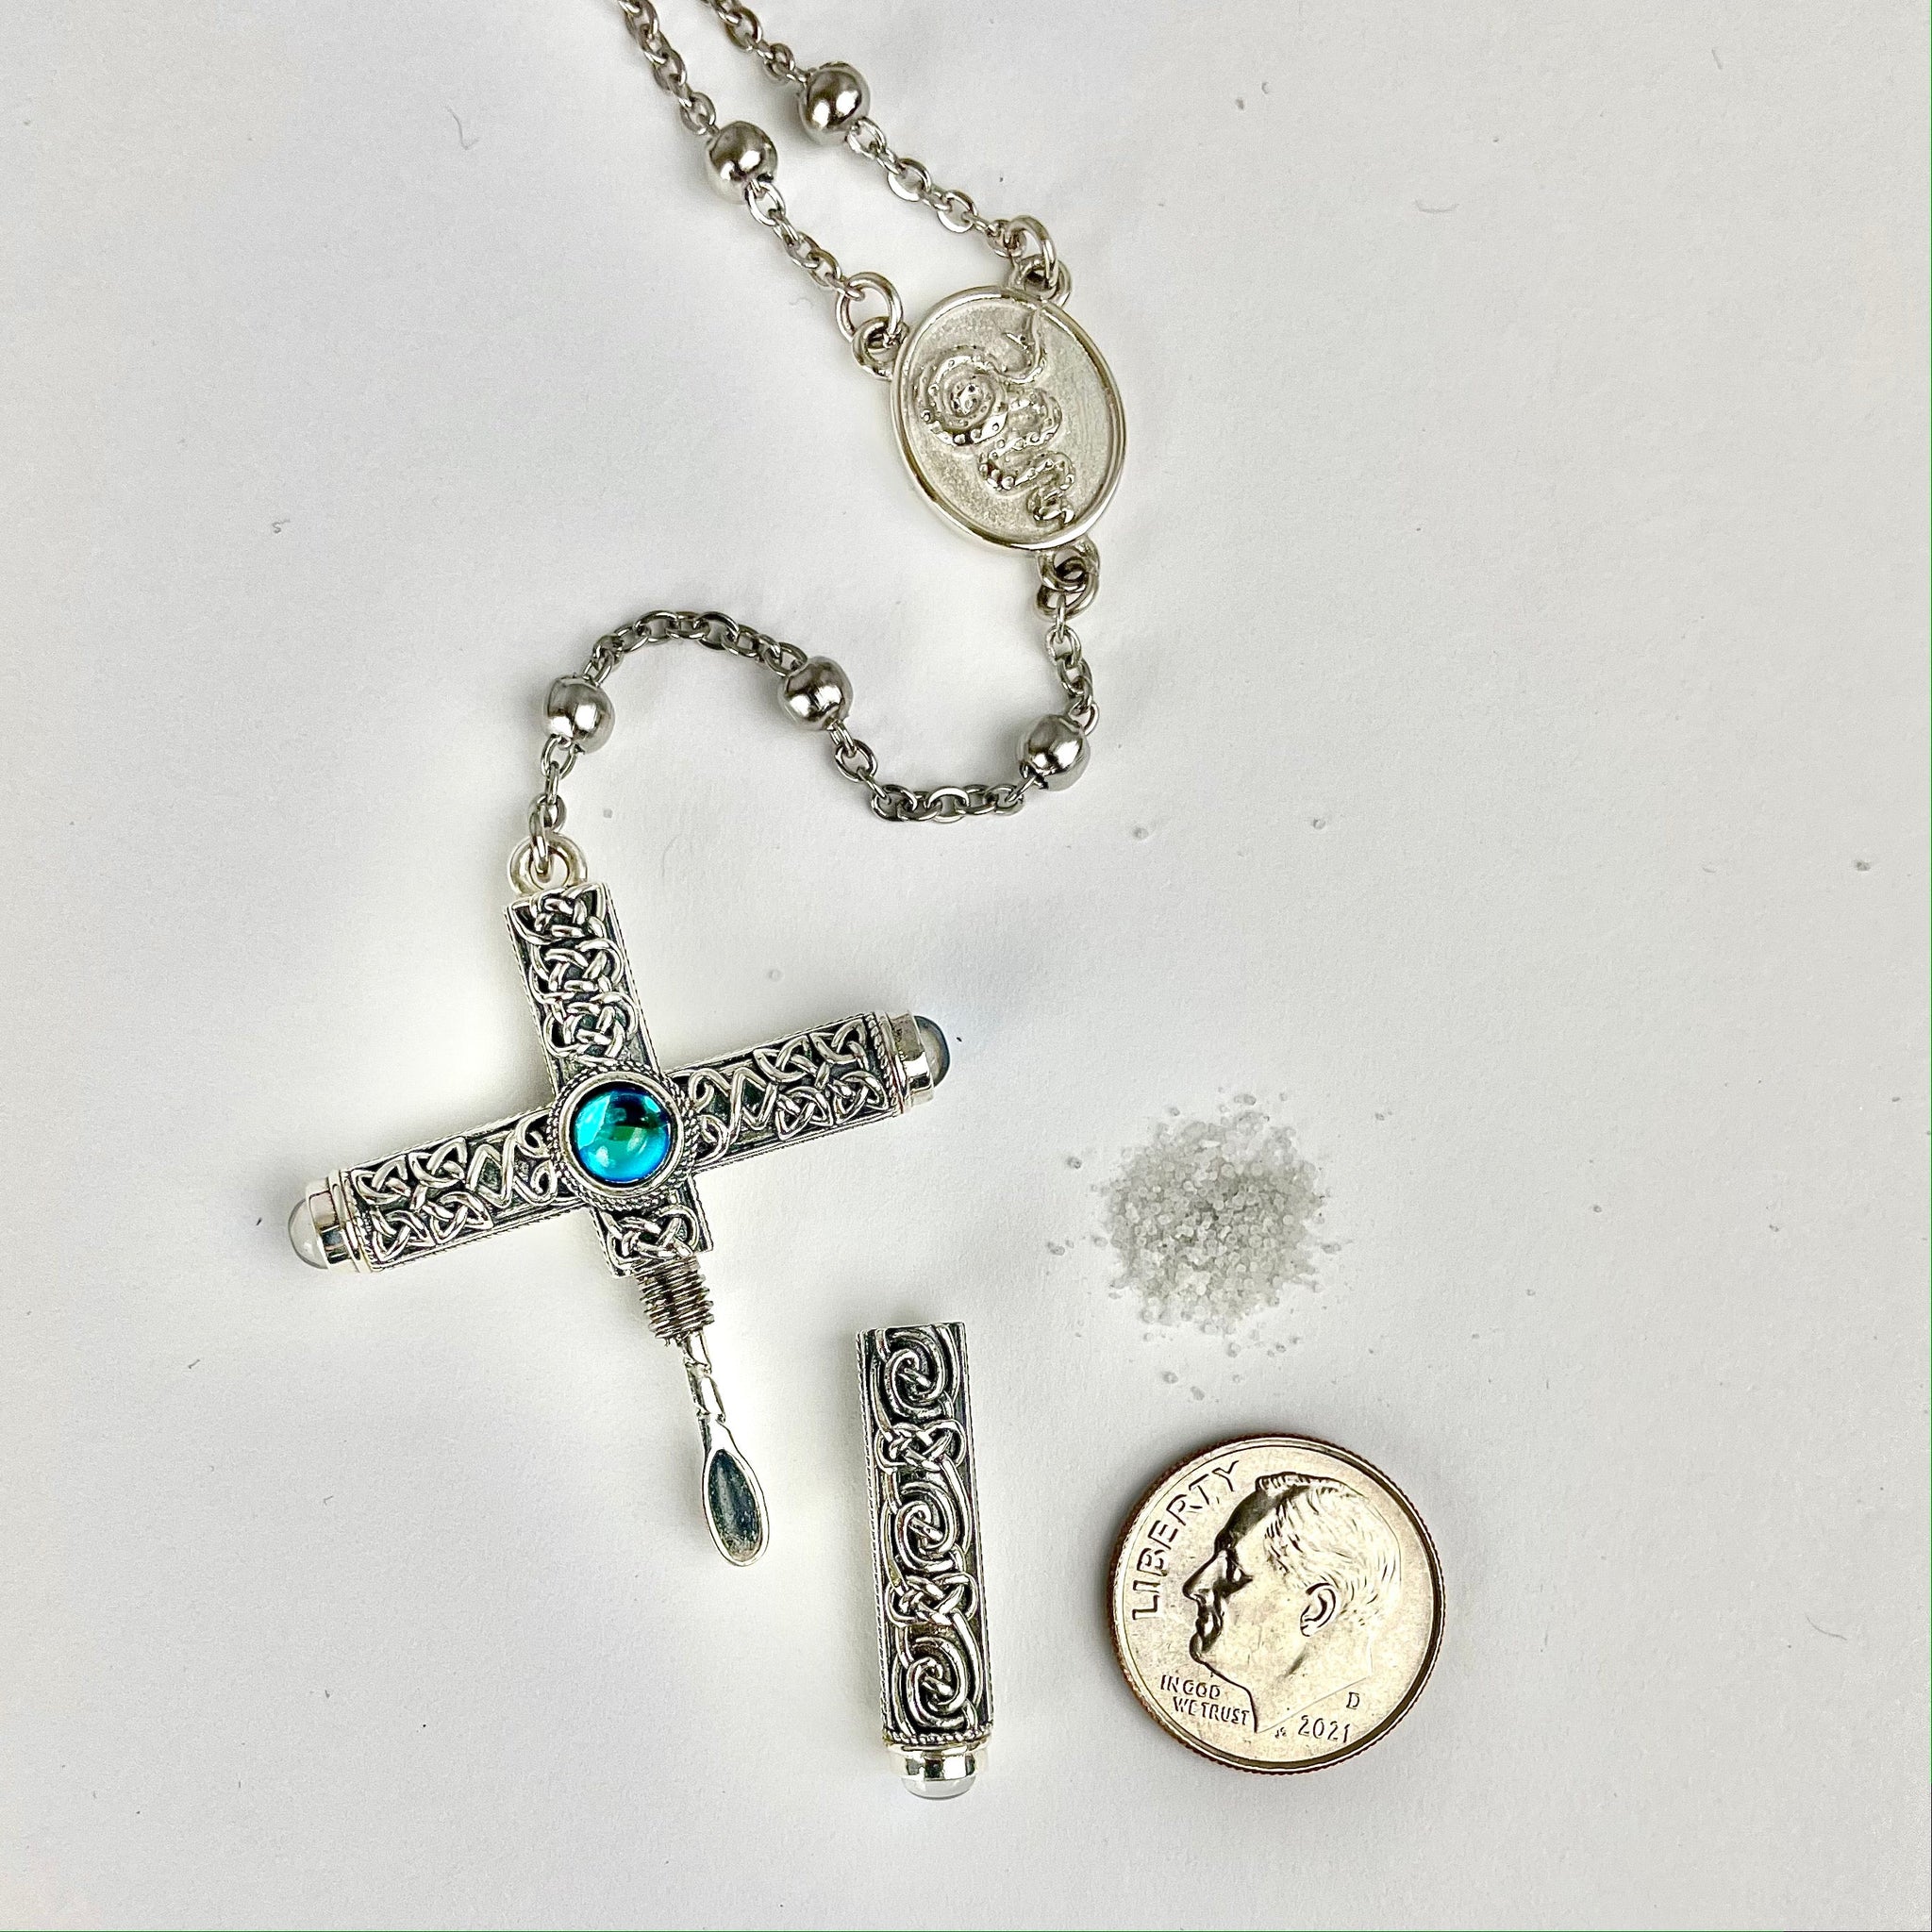 Cruel Intentions Necklace, Rosary Cross Necklace, Stainless Steel